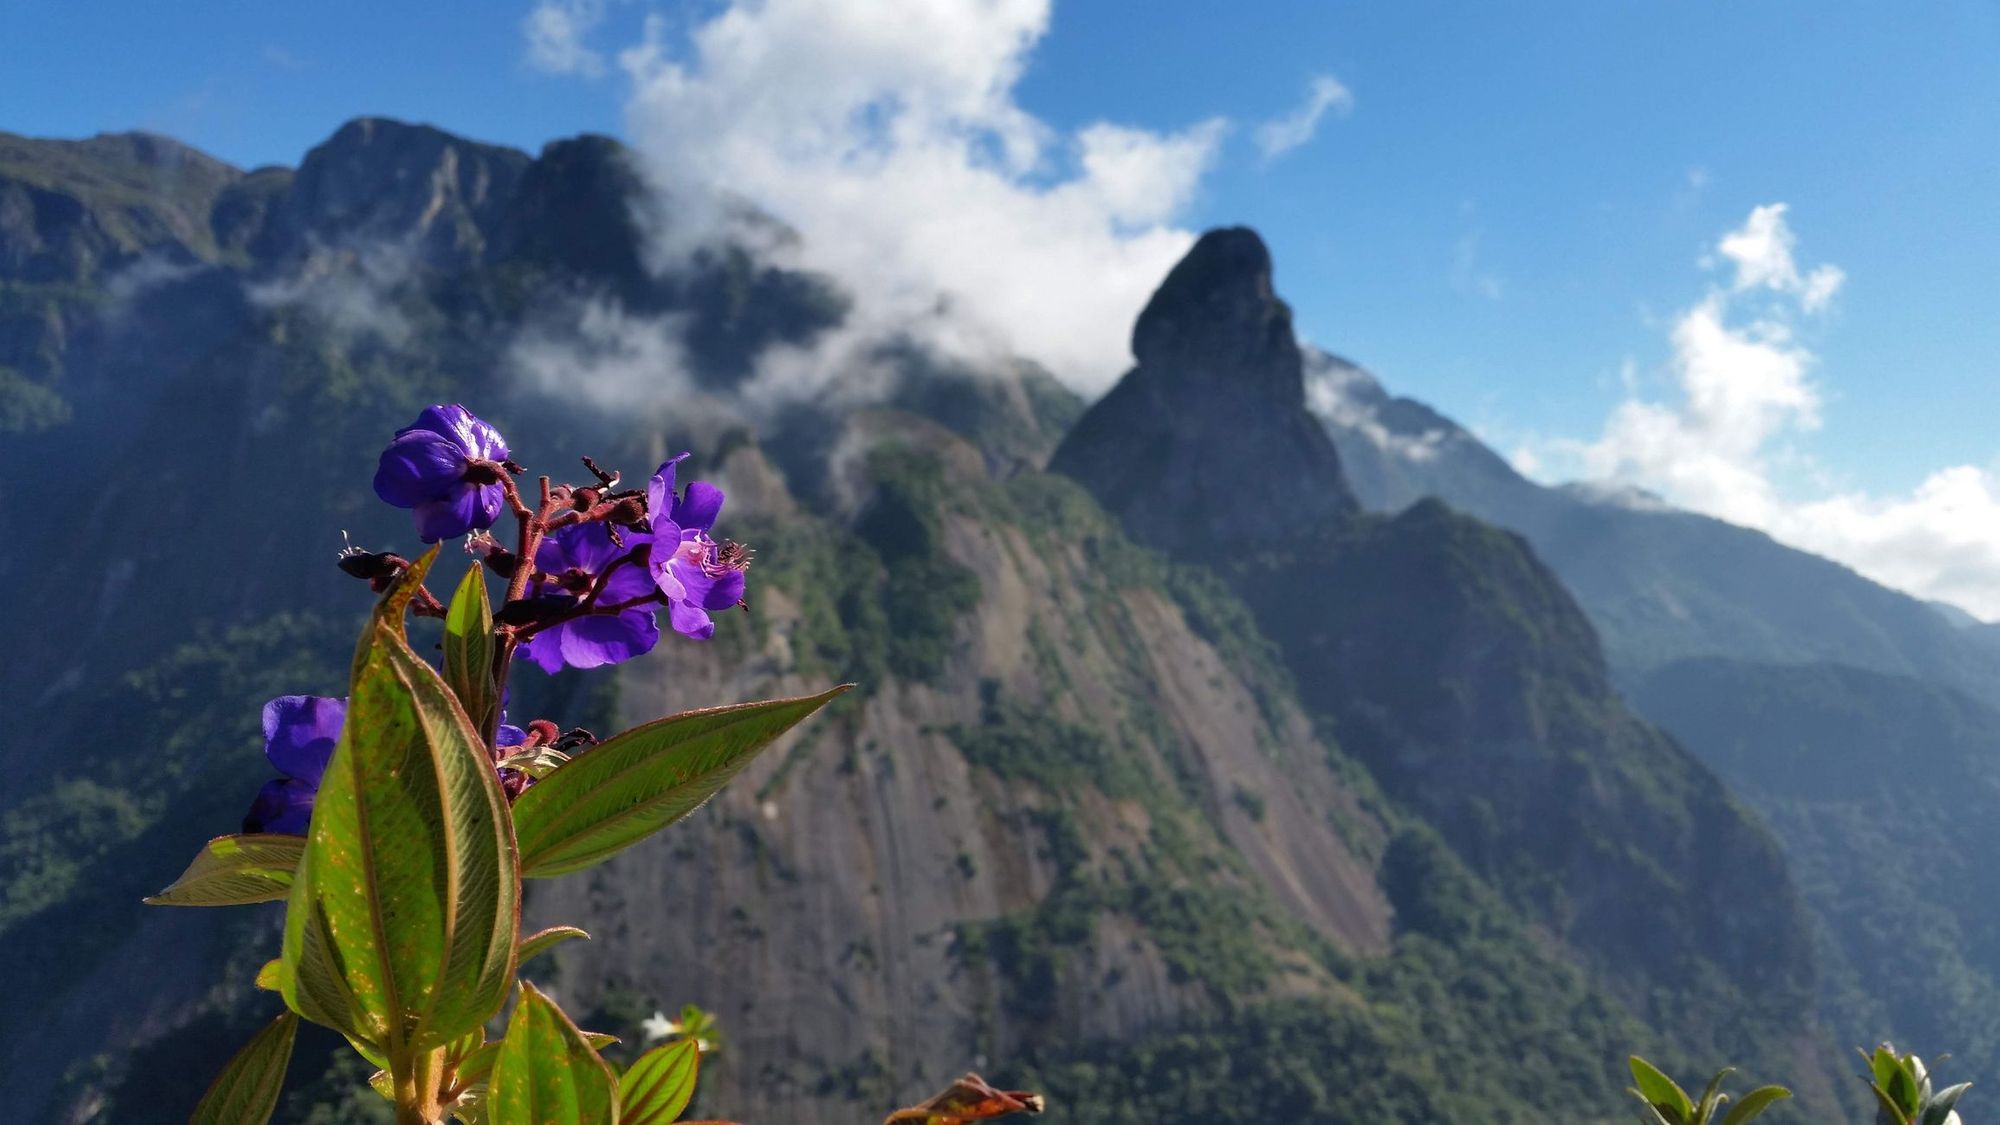 The mountains of Brazil's  Serra dos Órgãos National Park, with an orchid in the foreground.